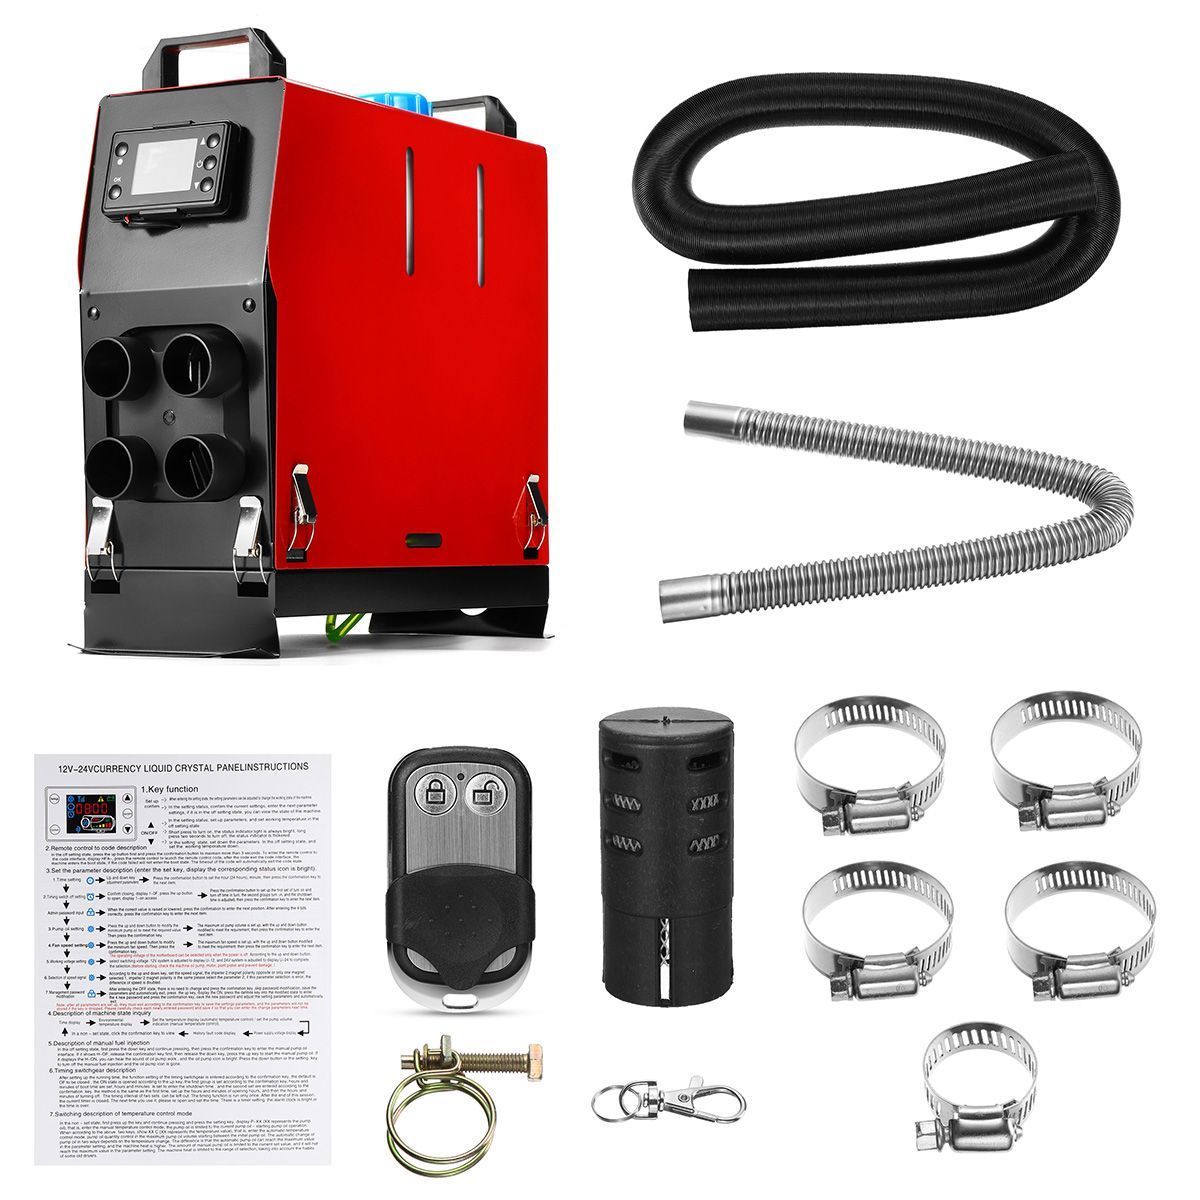 All-In-1-Integrated-Machine-12V-8000W-Diesel-Air-Heater-LCD-Car-Air-Parking-Heater-with-Remote-1432616